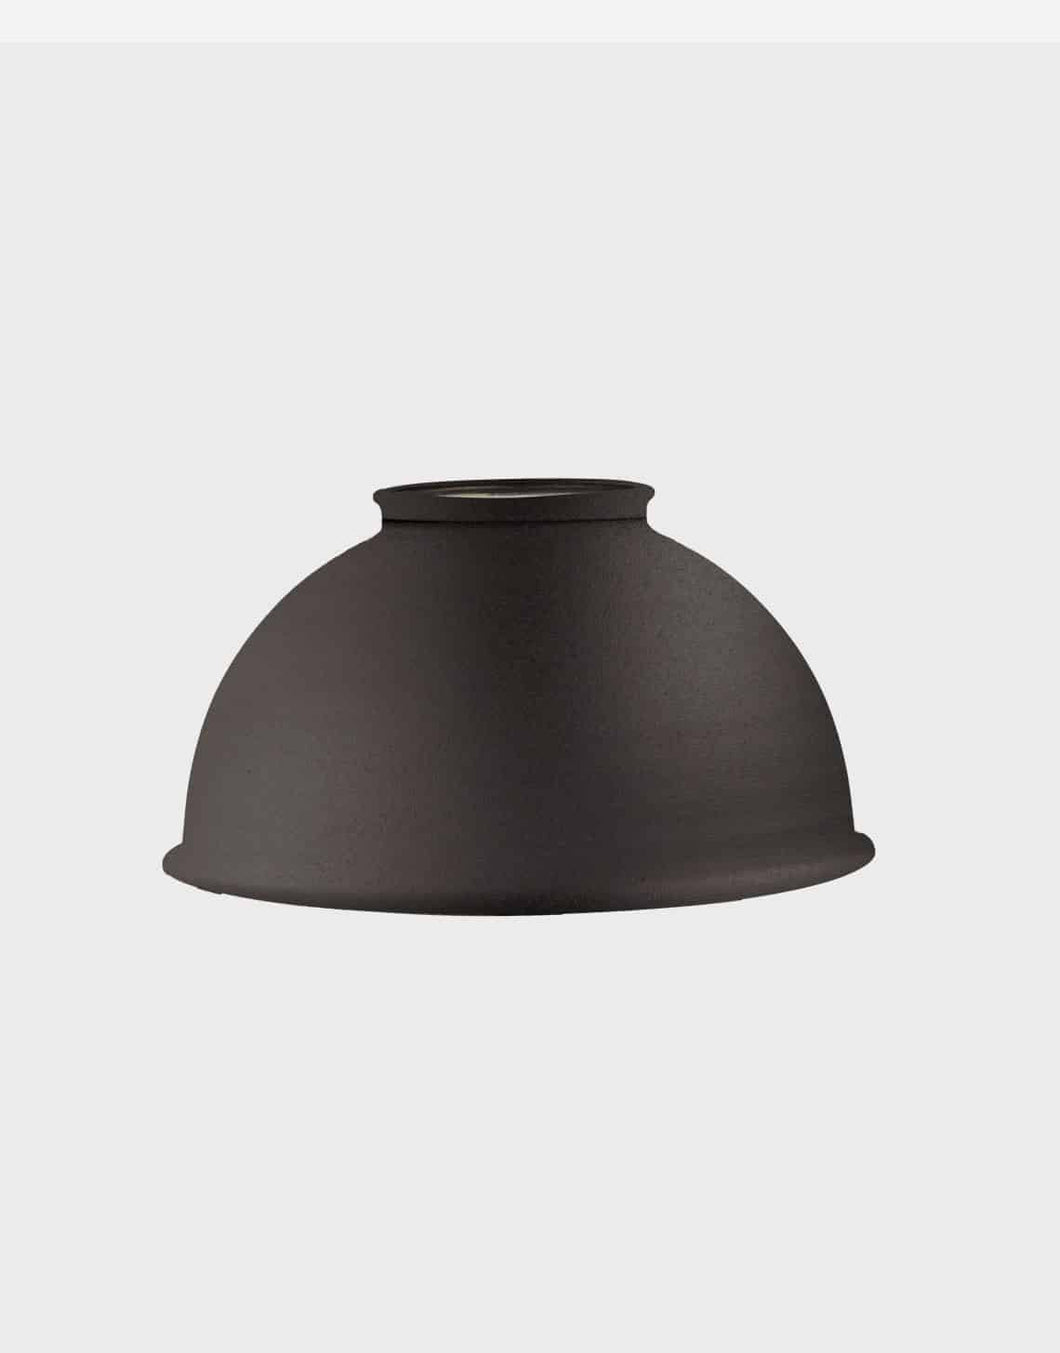 Powder Coated Dome, D3P